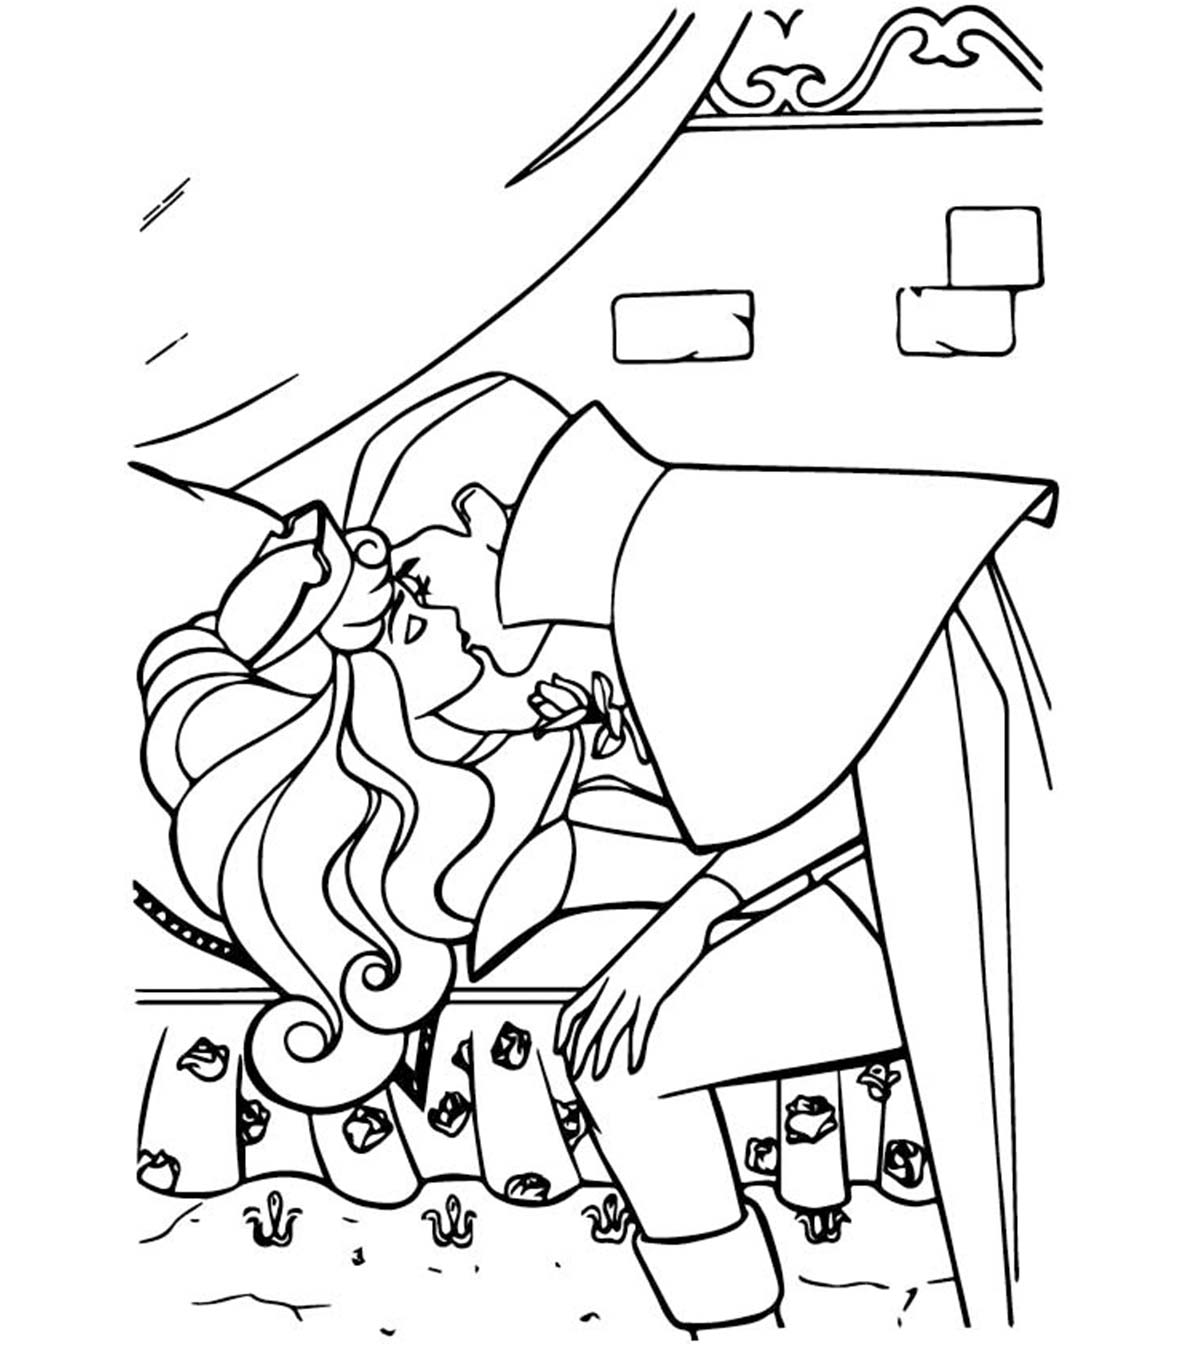 15 Beautiful Sleeping Beauty Coloring Pages Your Toddler Will Love_image